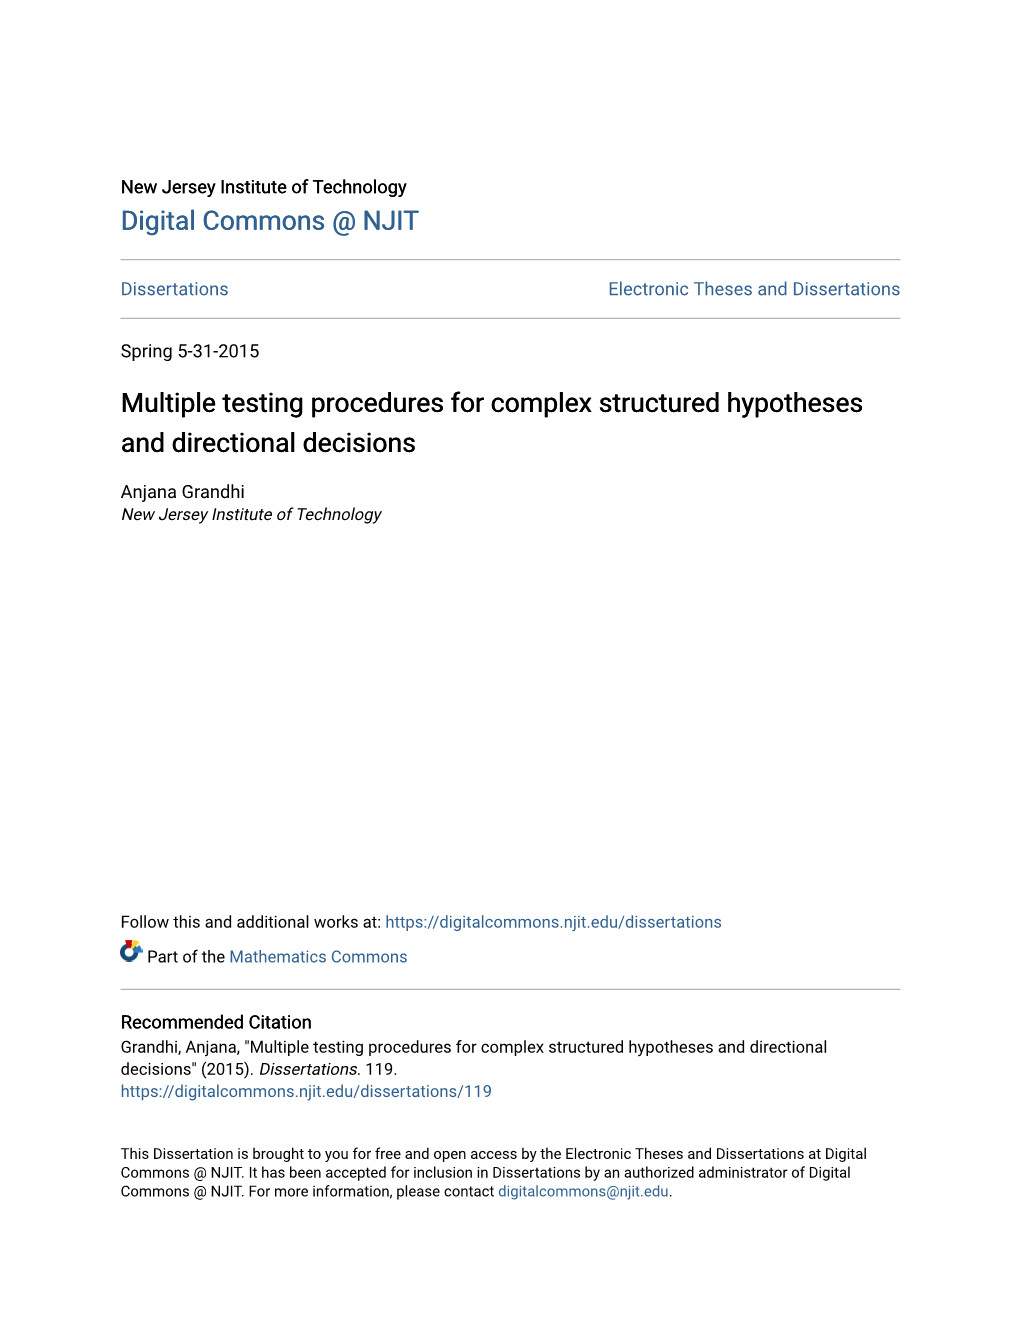 Multiple Testing Procedures for Complex Structured Hypotheses and Directional Decisions